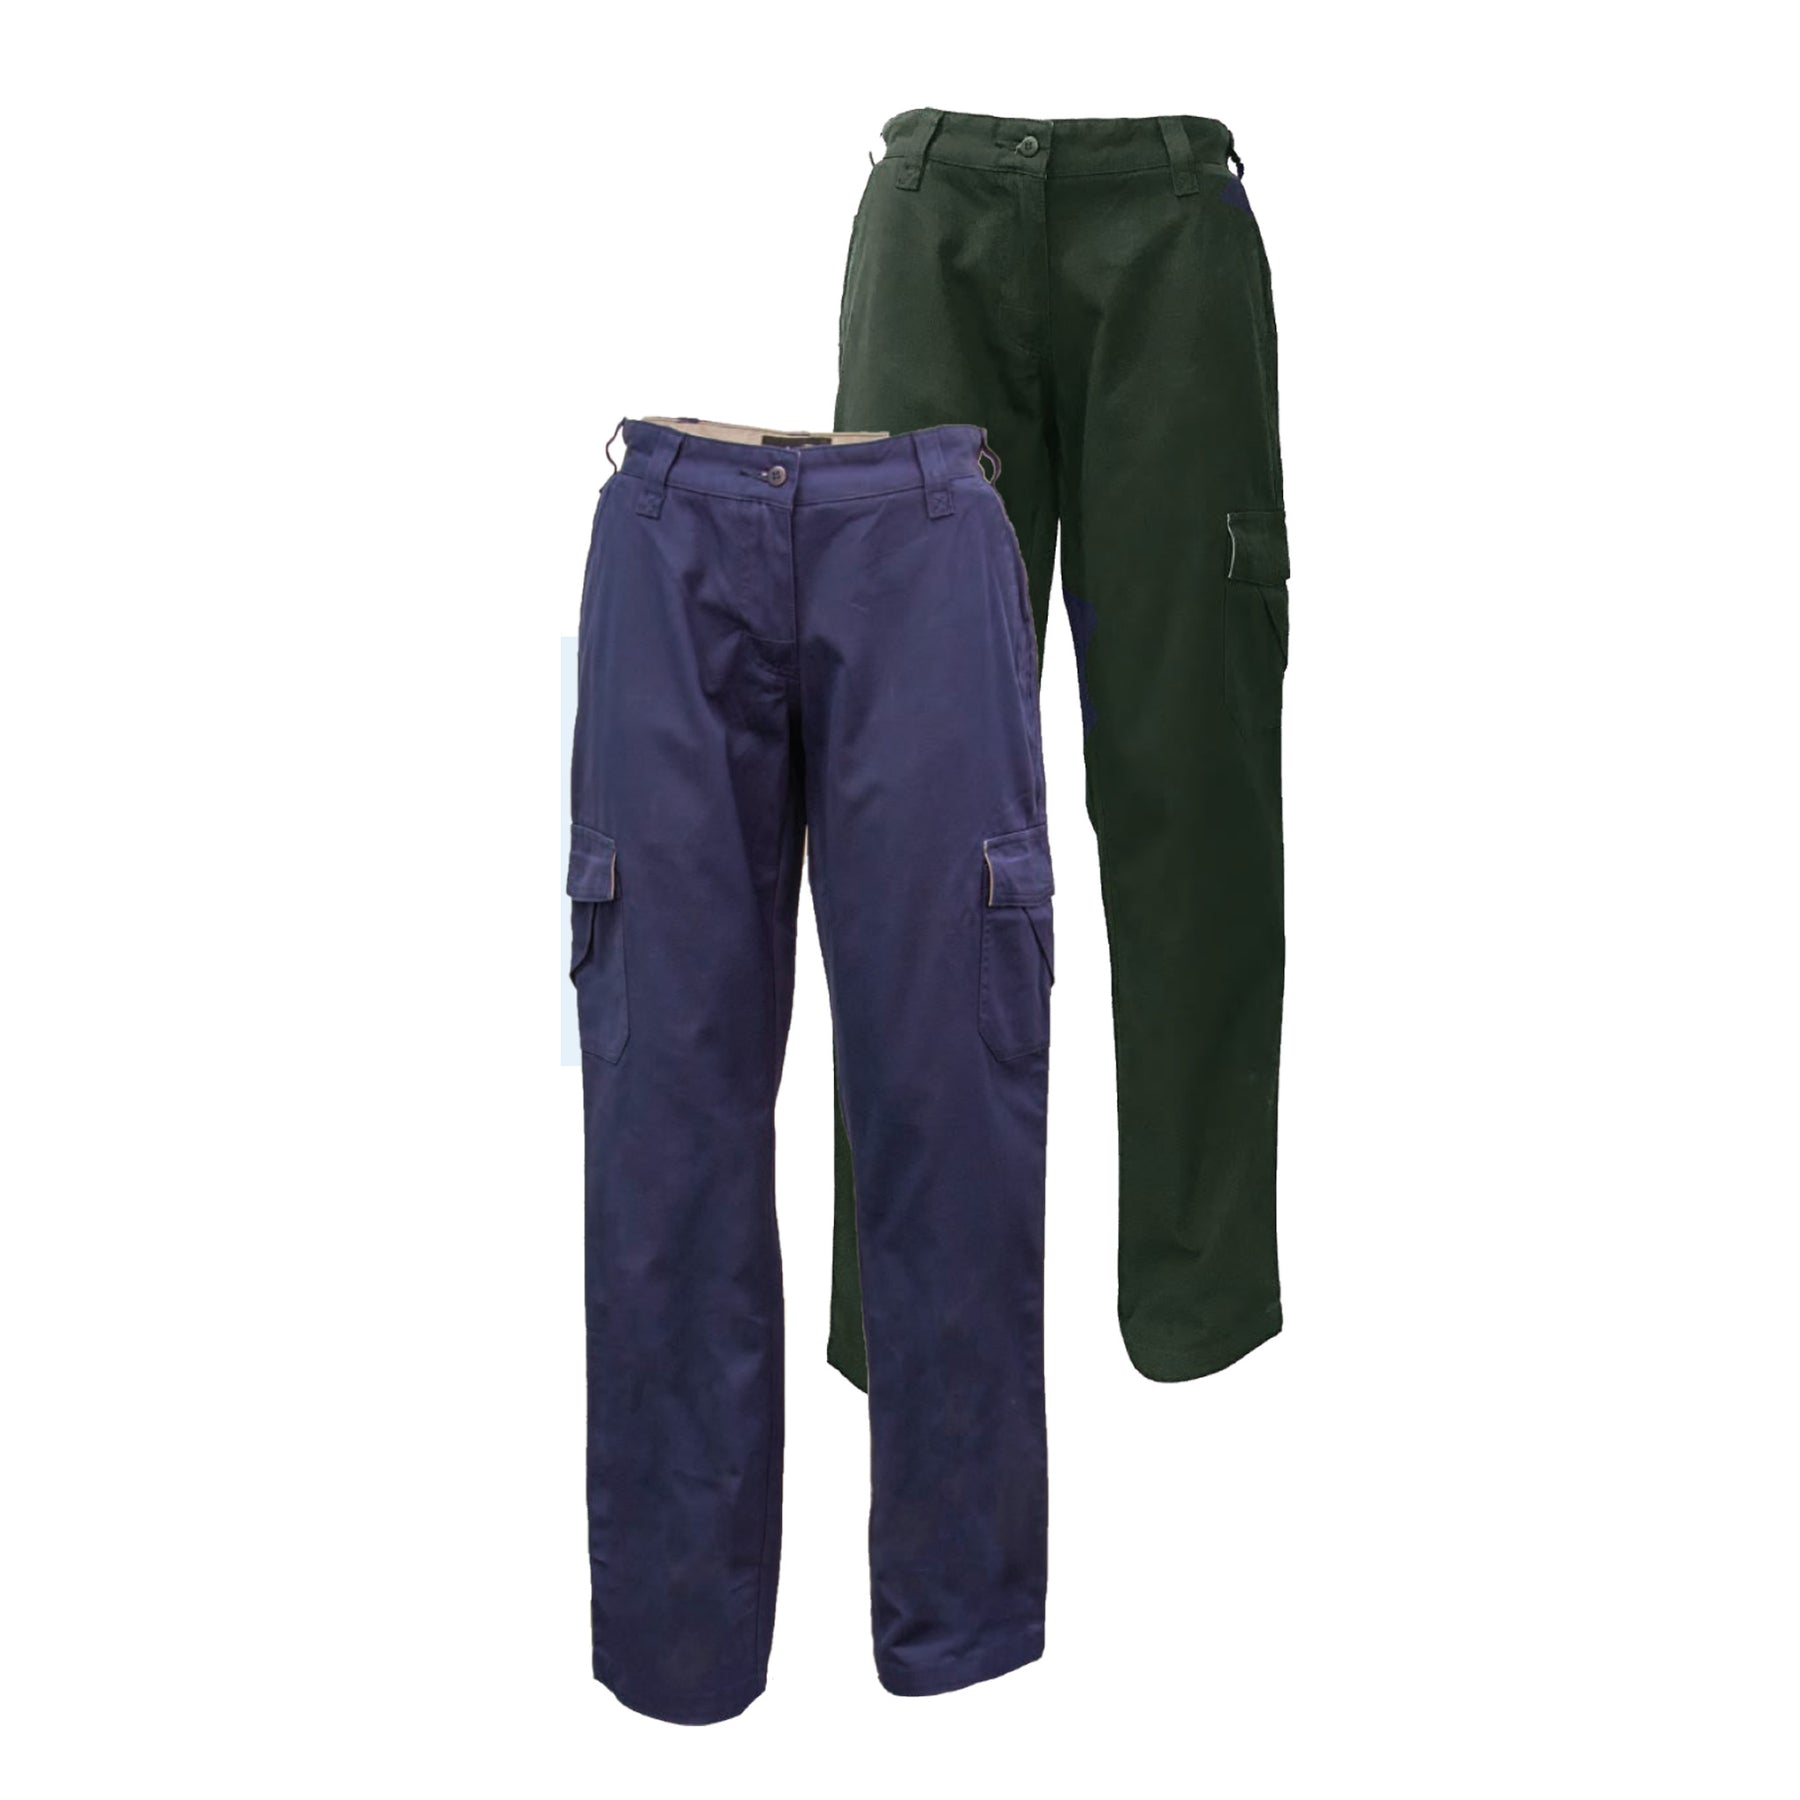 mid weight cotton cargo trousers in green and navy